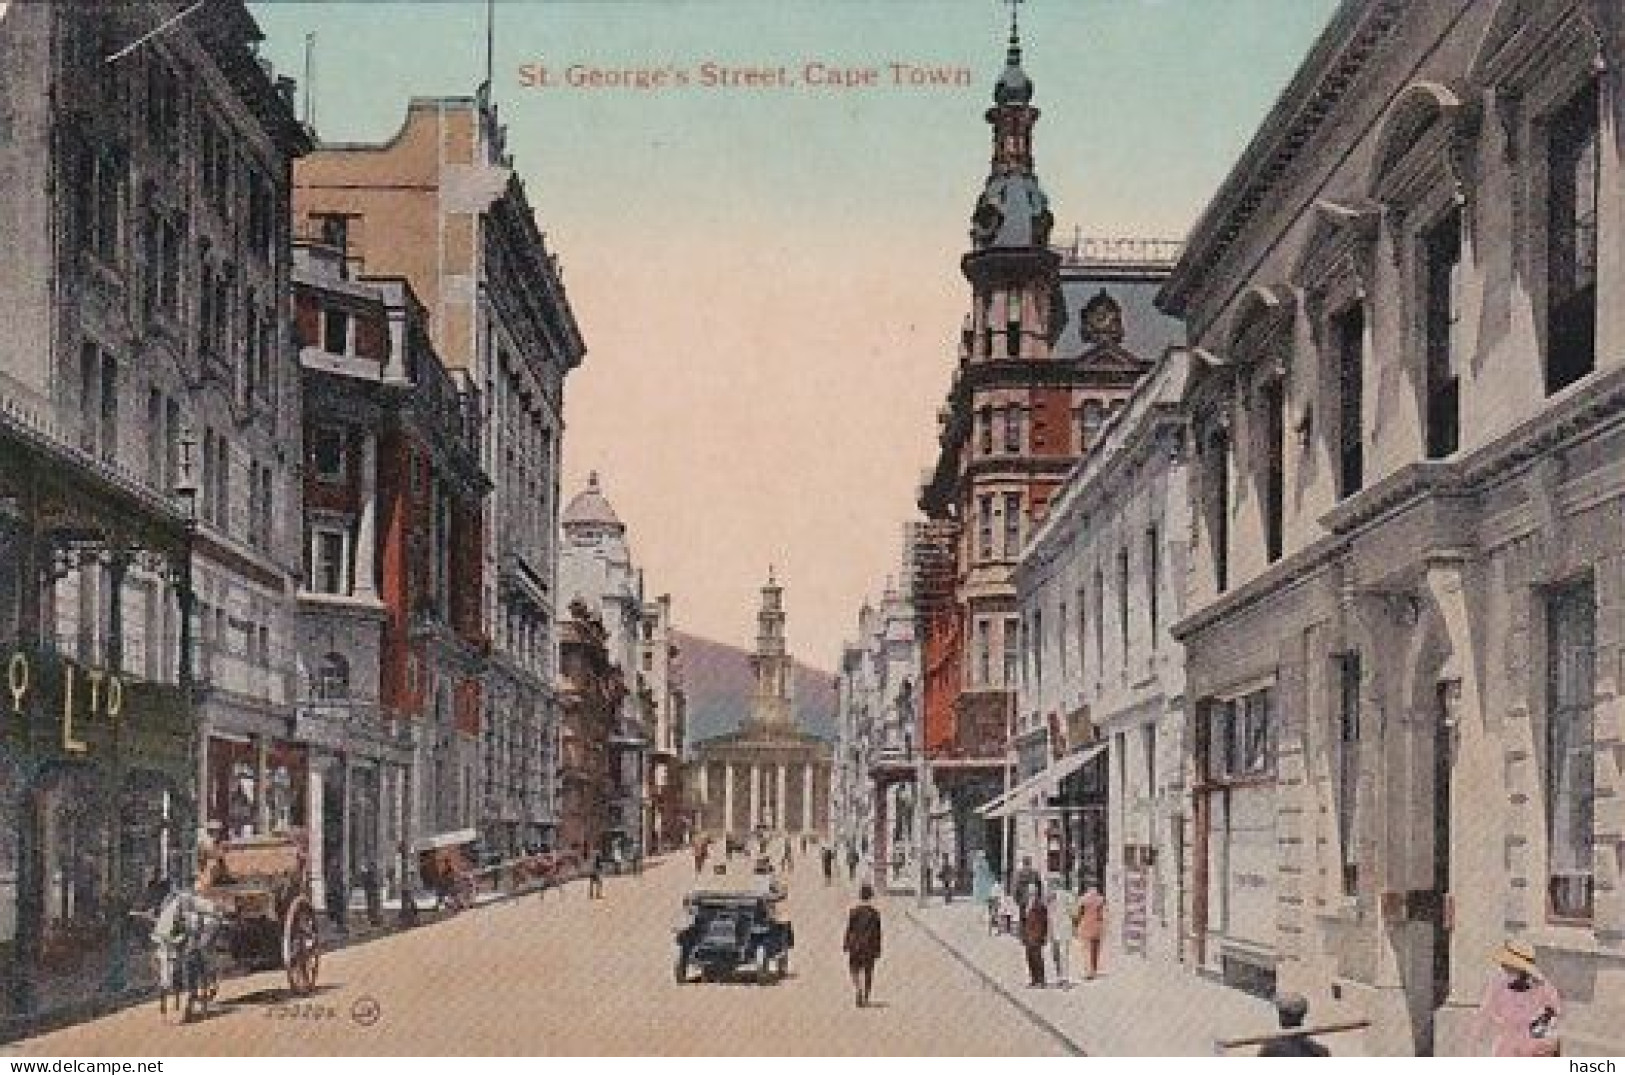 1830	8	Cape Town, St George’s Street (see Corners) - South Africa